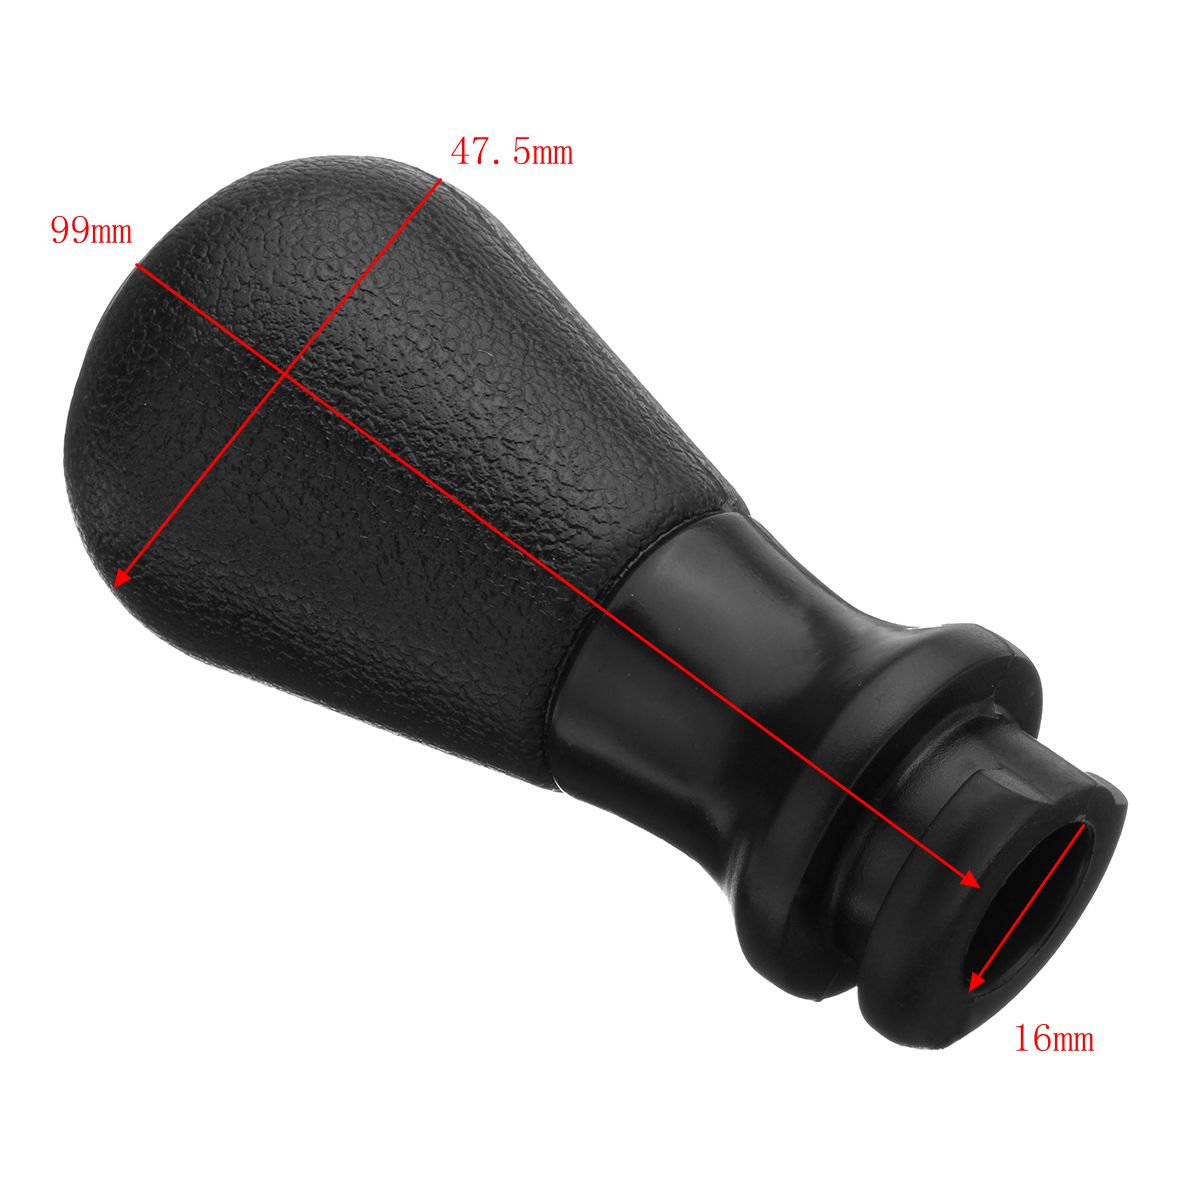   5 Speed Manual Car Gear Shift Knob For Peugeot 106 206 306 406 806 107 207 307